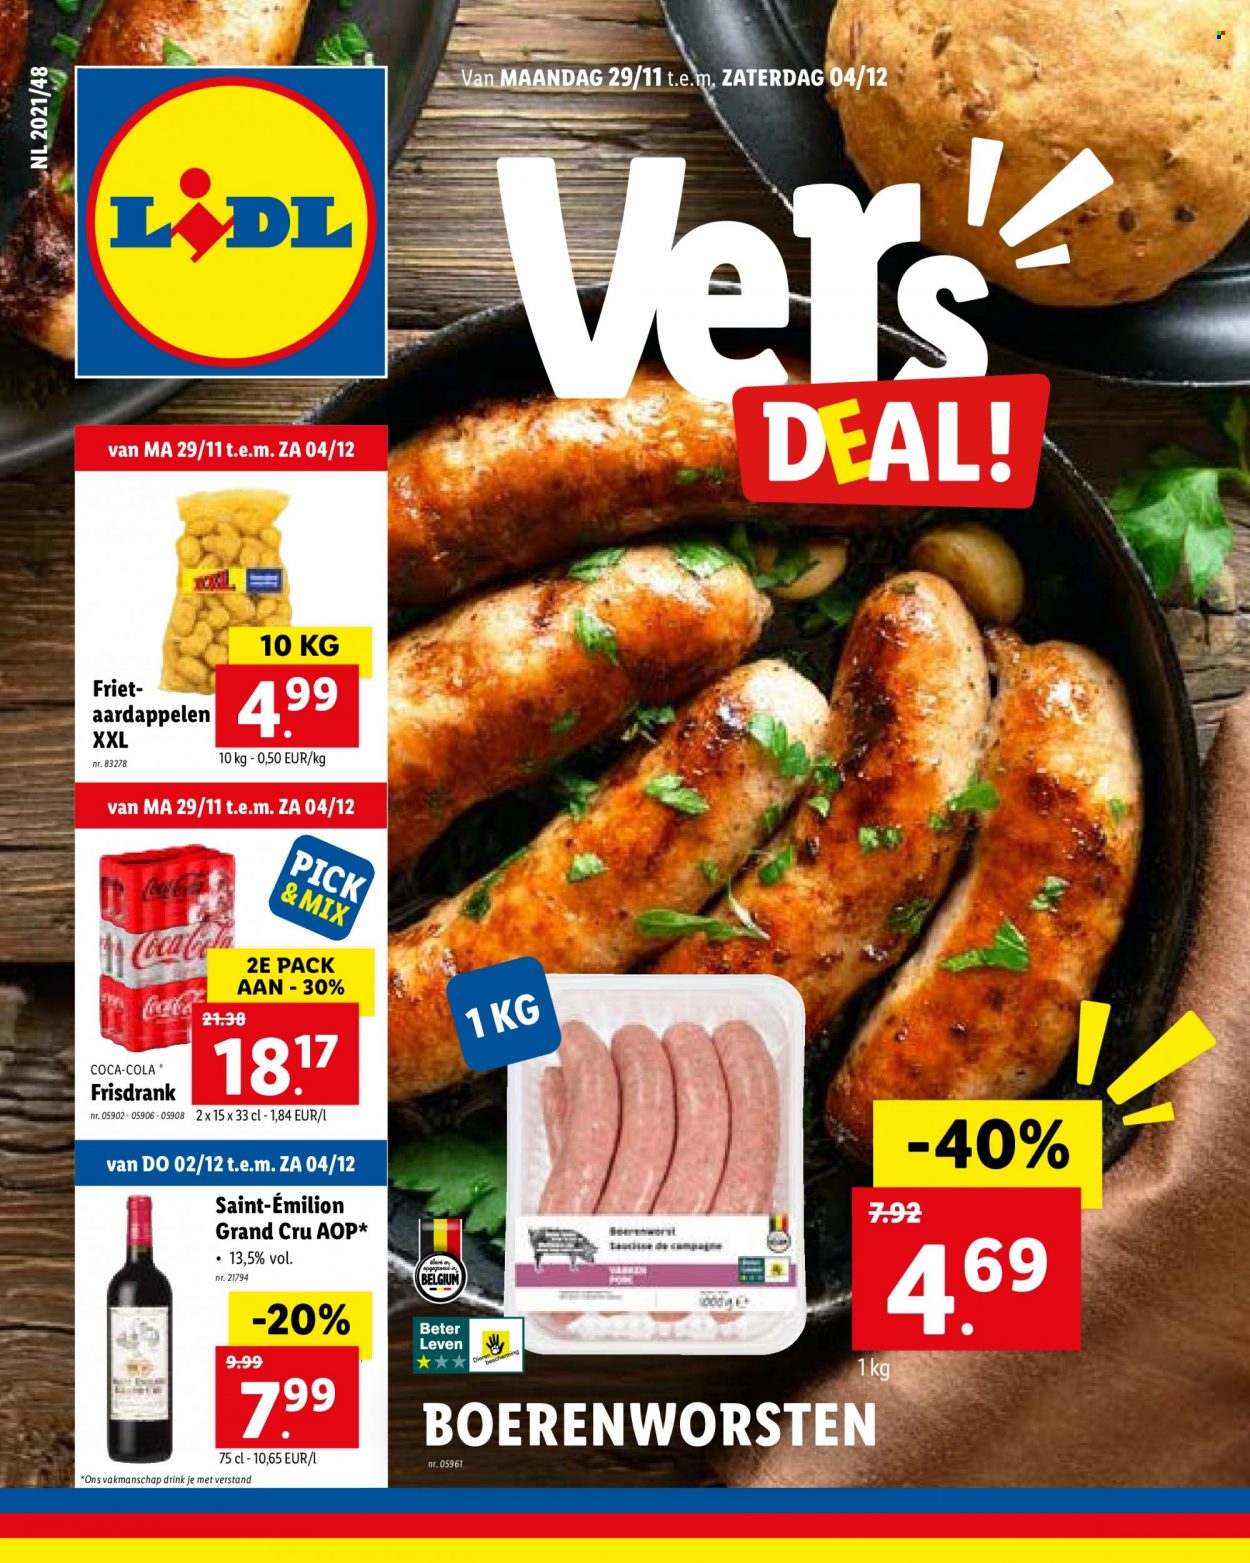 Catalogue Lidl - 29.11.2021 - 4.12.2021. Page 1.